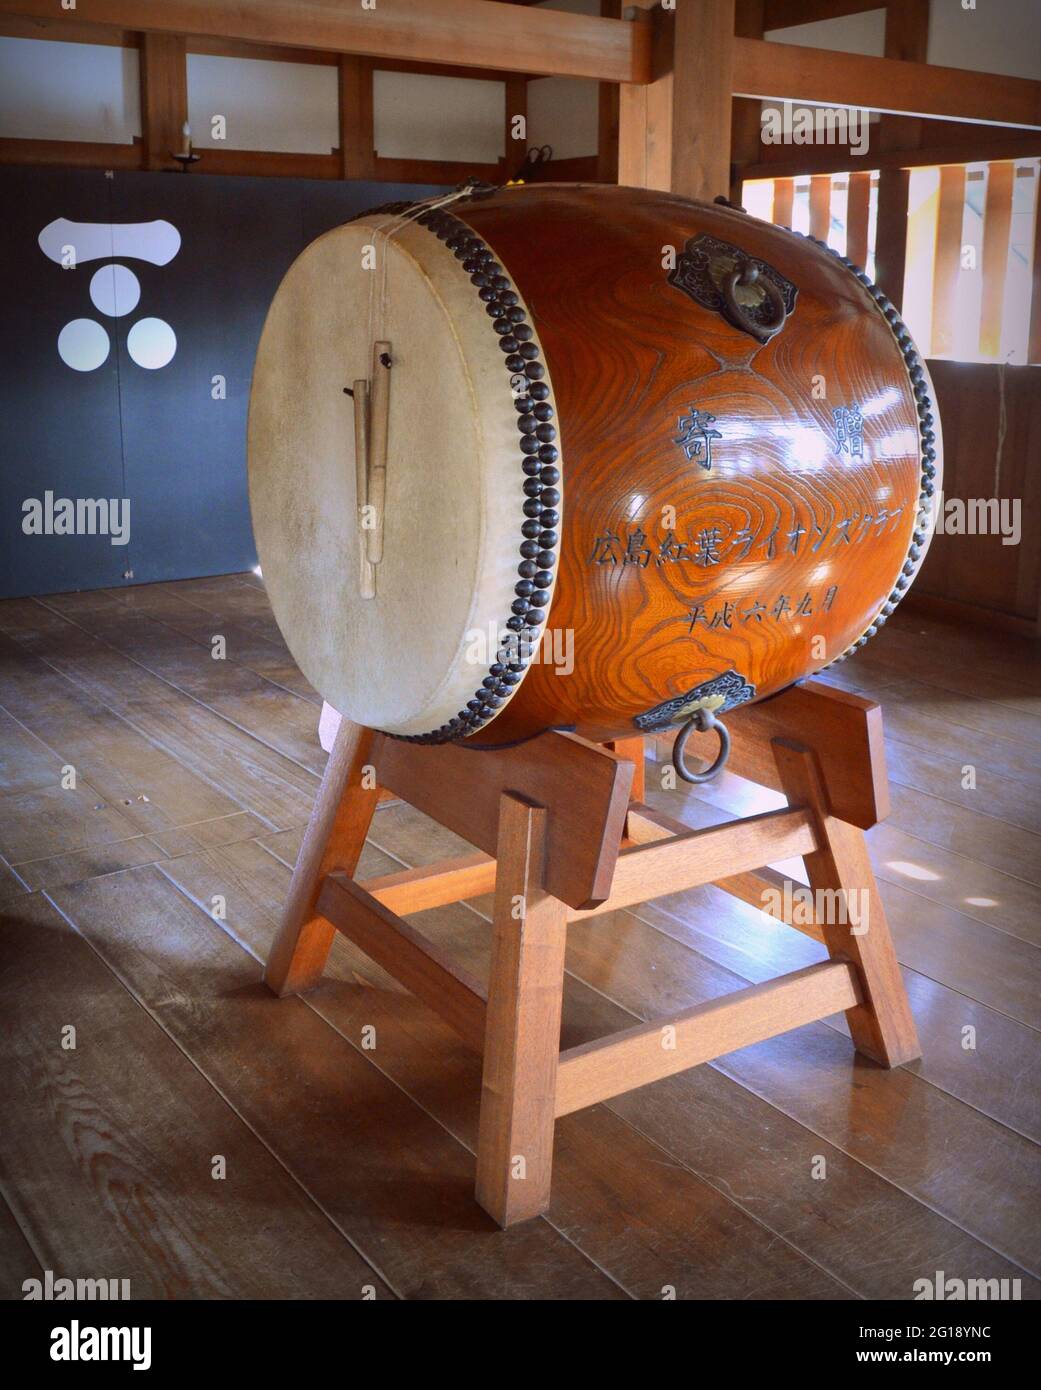 Taiko are a broad range of Japanese percussion instruments. These drums have a mythological origin in Japanese folklore. Hiroshima castle, Japan. Stock Photo